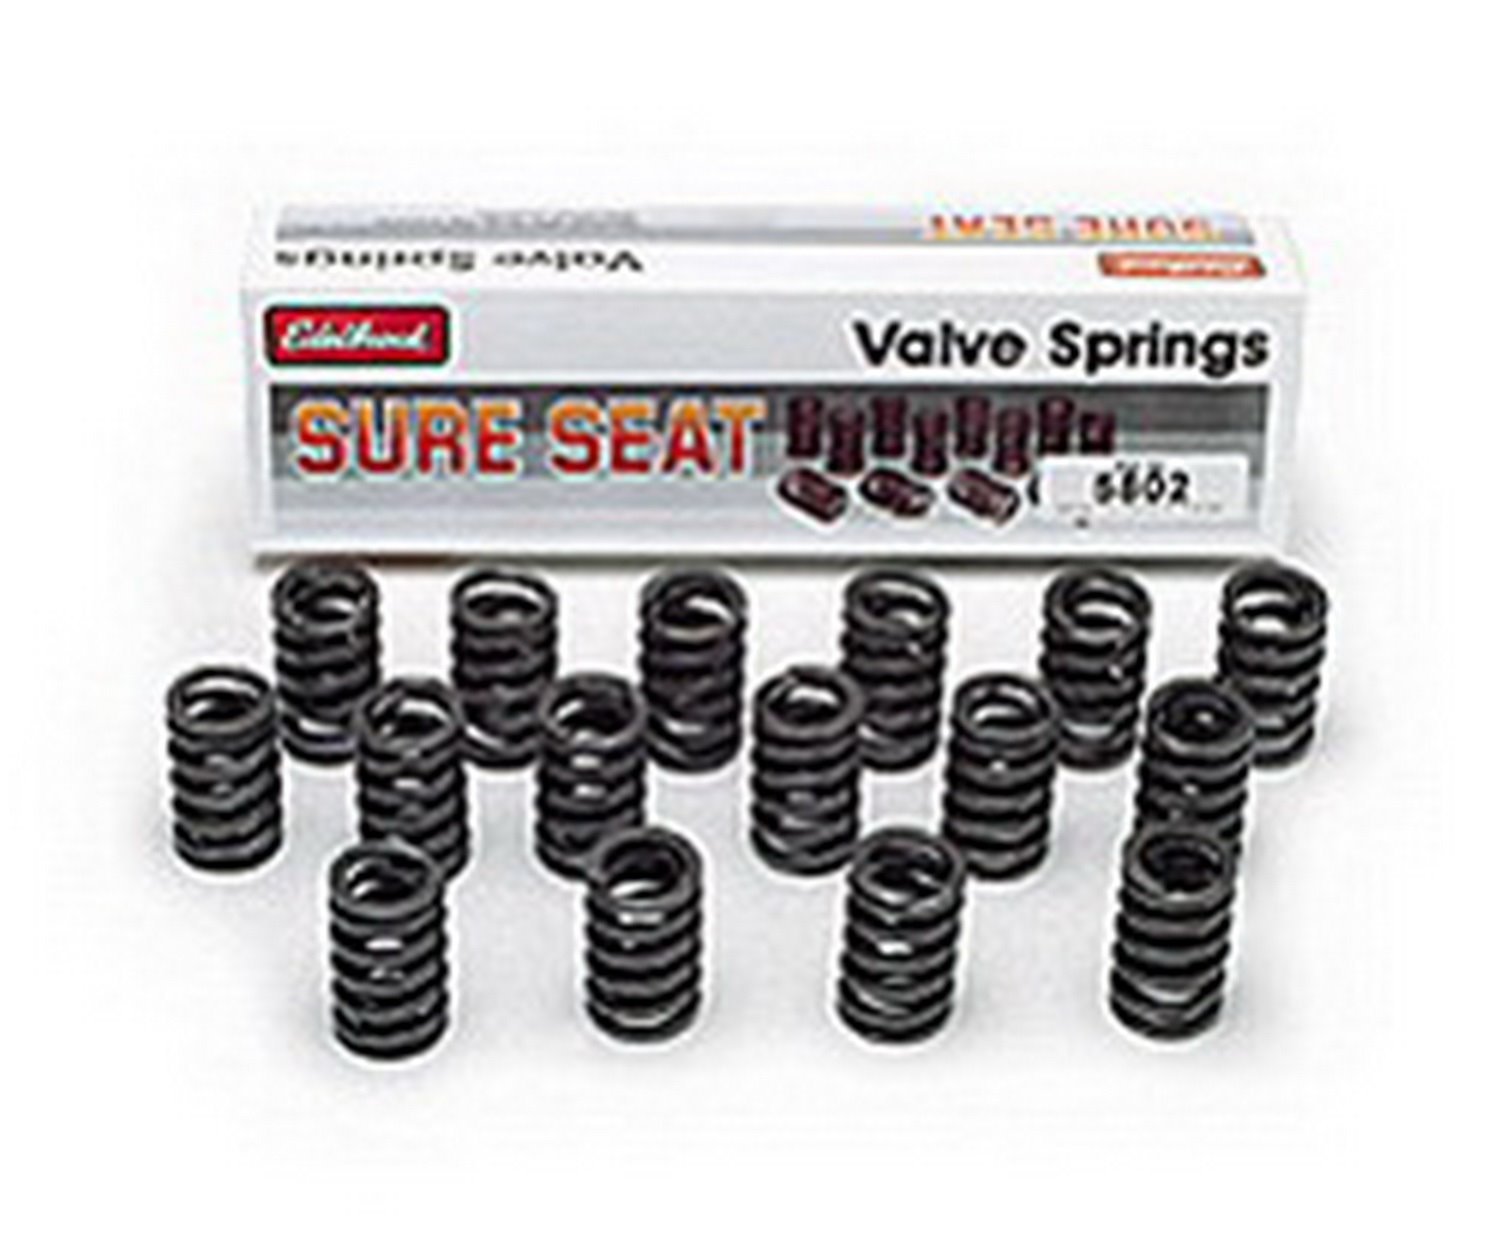 Sure Seat Valve Springs for Big Block Chevy 396-454 OE Cast Iron Head